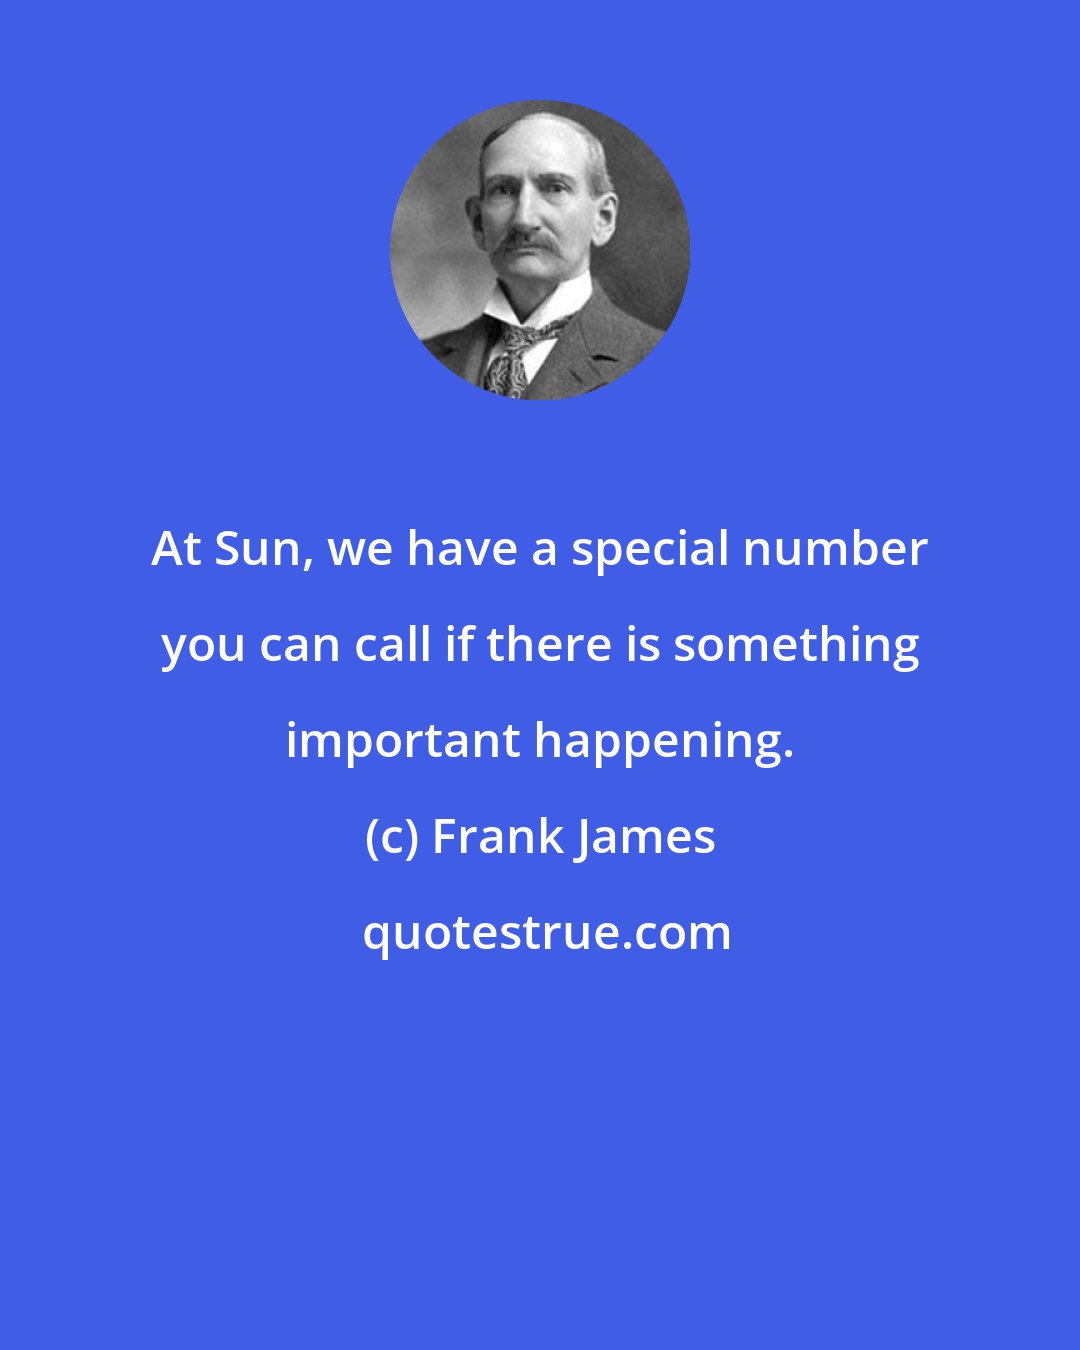 Frank James: At Sun, we have a special number you can call if there is something important happening.